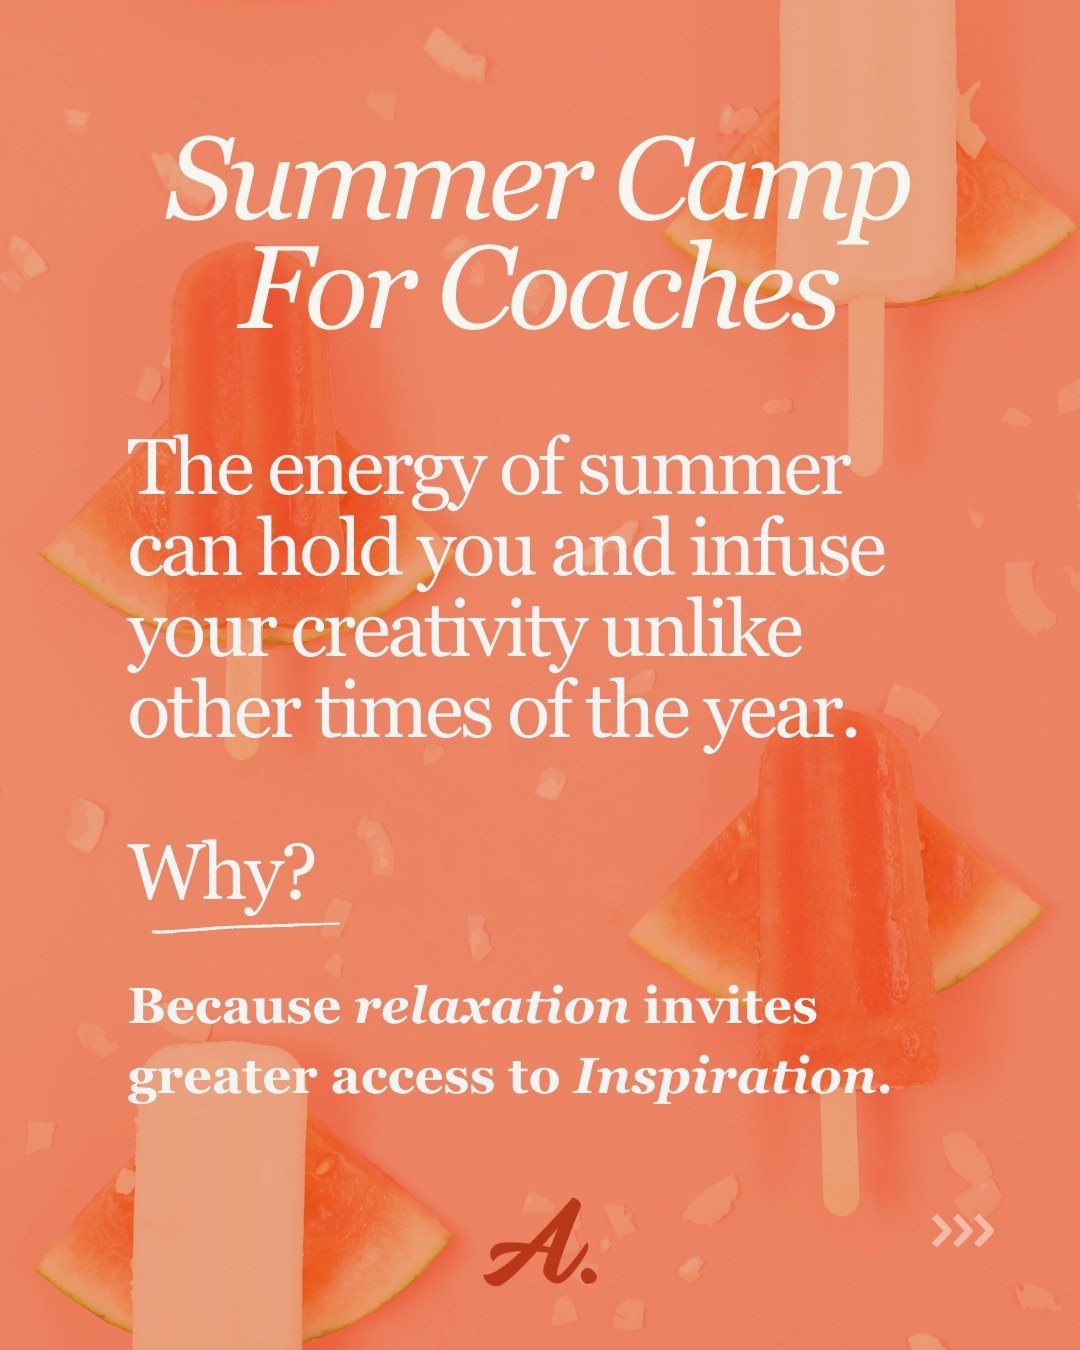 Big news! 📣 You're invited!

Imagine playing a fuller, wiser, more relaxed game in your coaching practice&mdash;one that&rsquo;s not only effective but also super fun! Summer Camp for Coaches is back, and it&rsquo;s better than ever.

If you believe